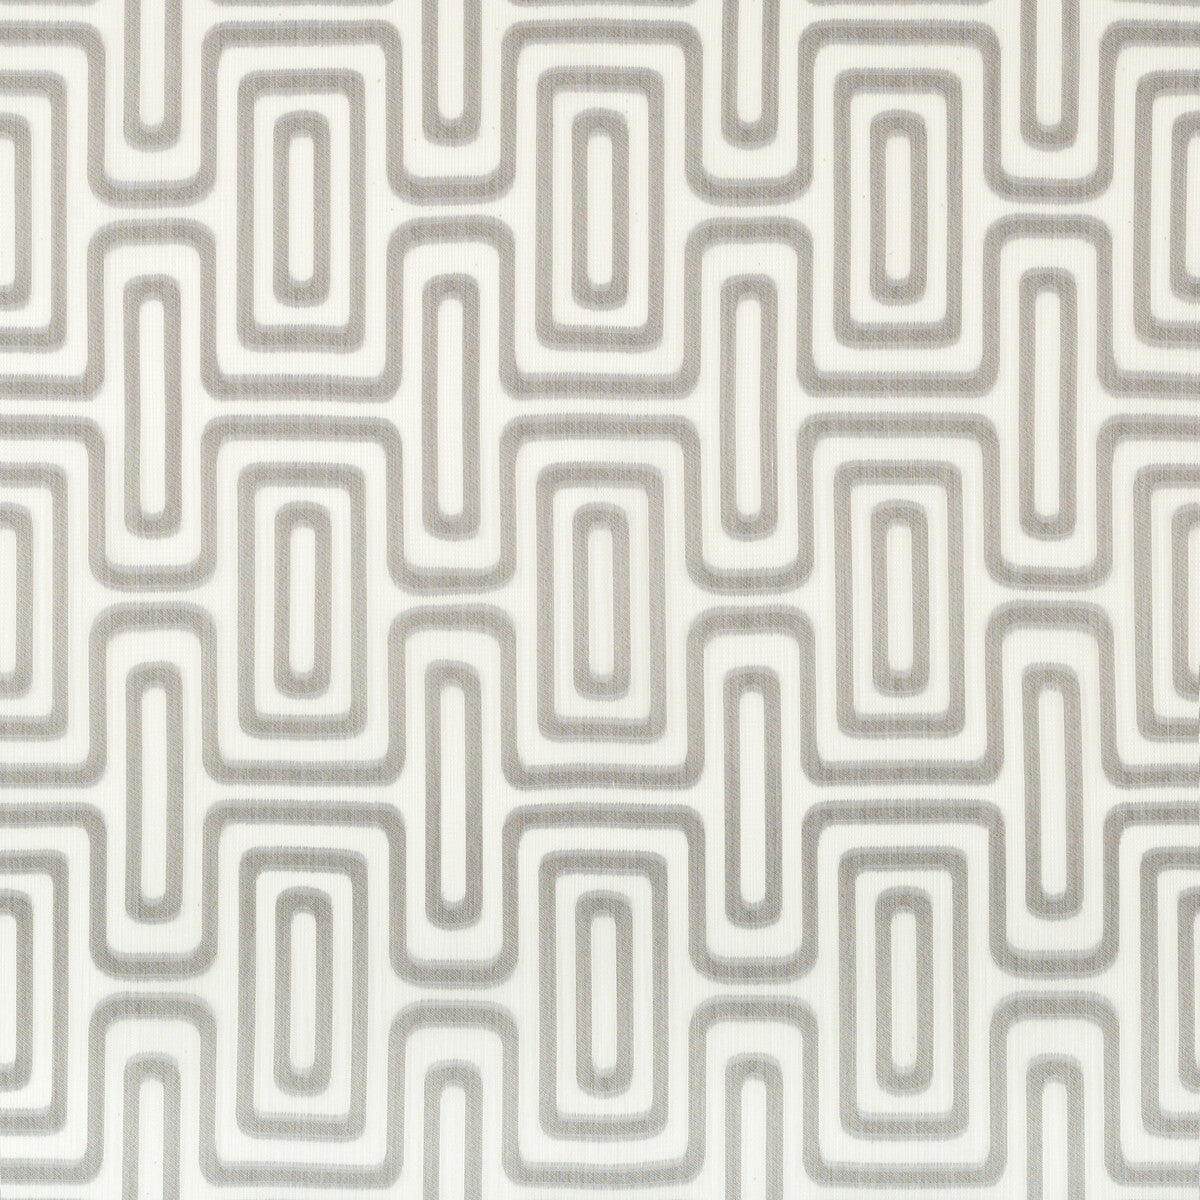 Bewilder fabric in shadow color - pattern 4834.11.0 - by Kravet Contract